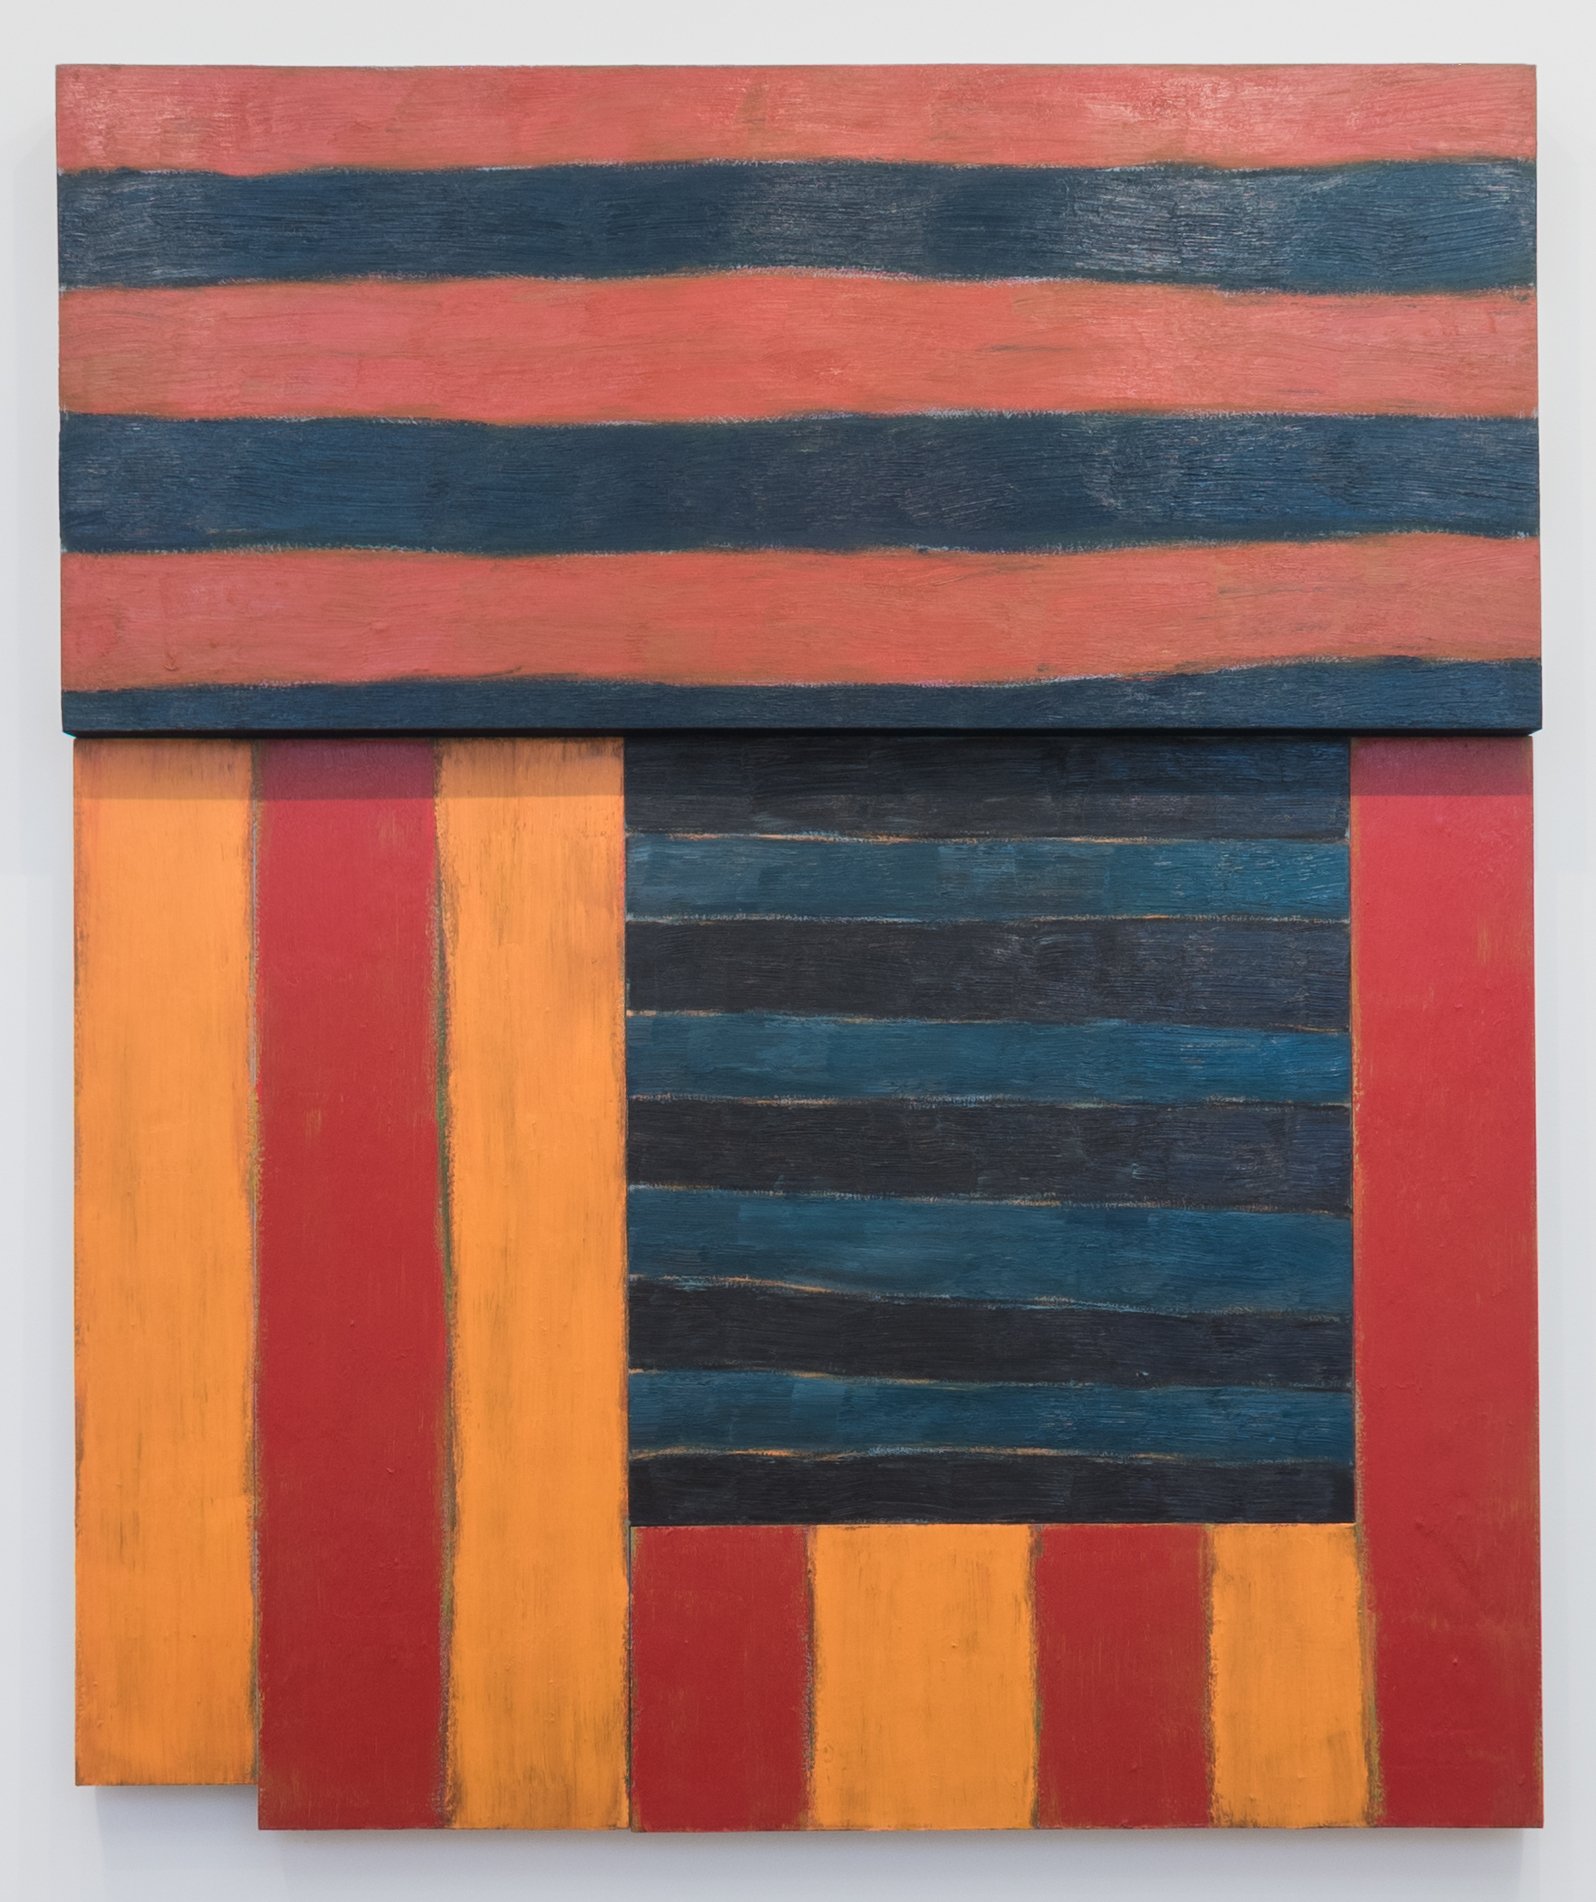 image07-seanscully-thefall-1983.jpg